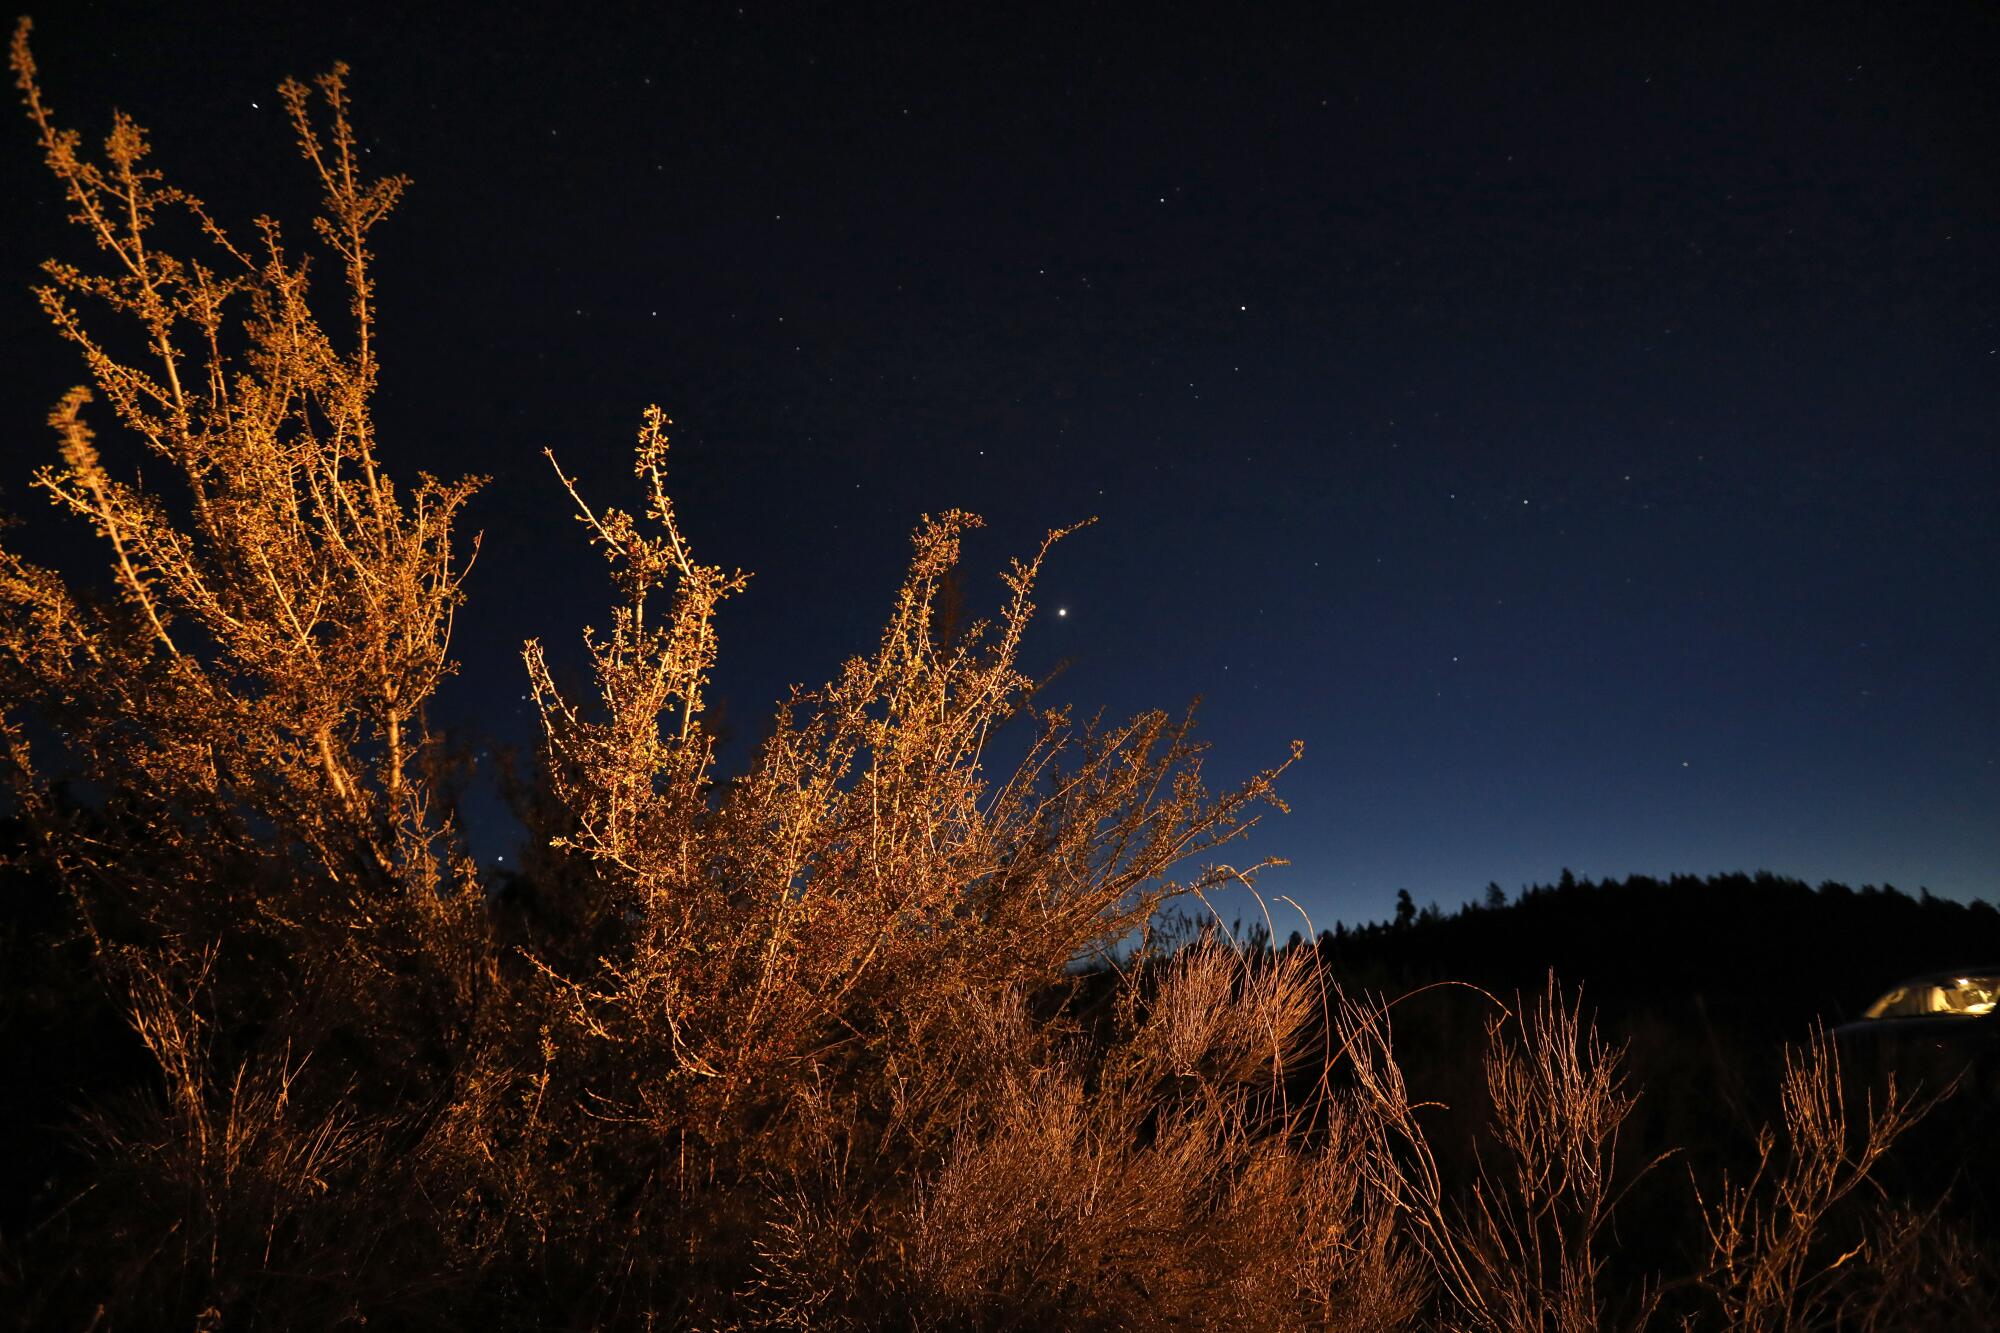 A night scene at Lava Beds National Monument, which is closed